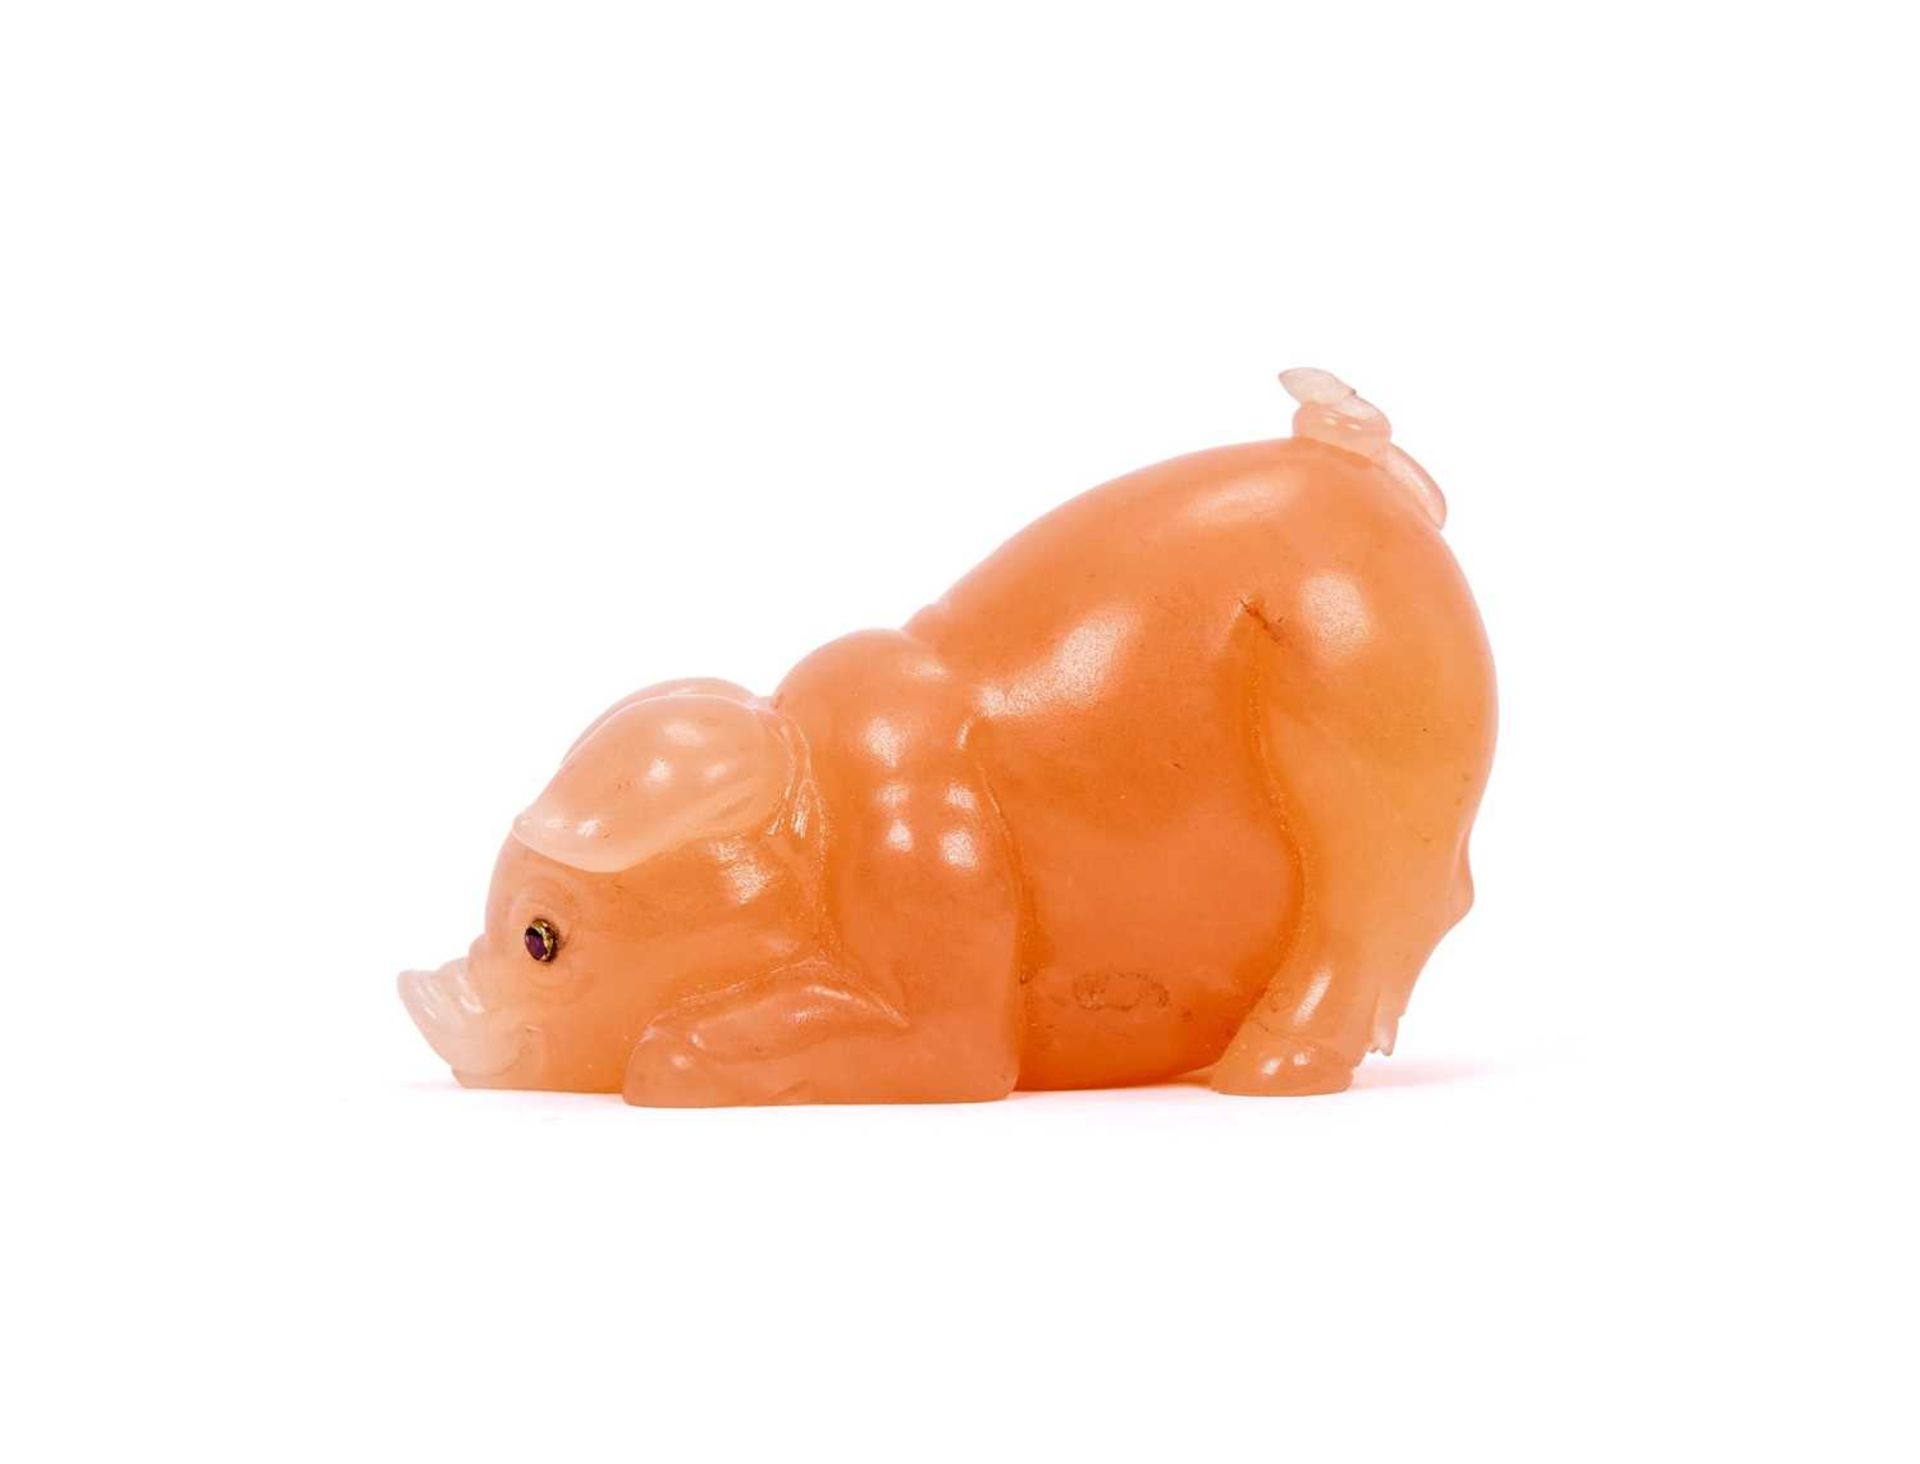 A FABERGE STYLE CARVED HARDSTONE AND GET SET MODEL OF A PIG - Image 2 of 3